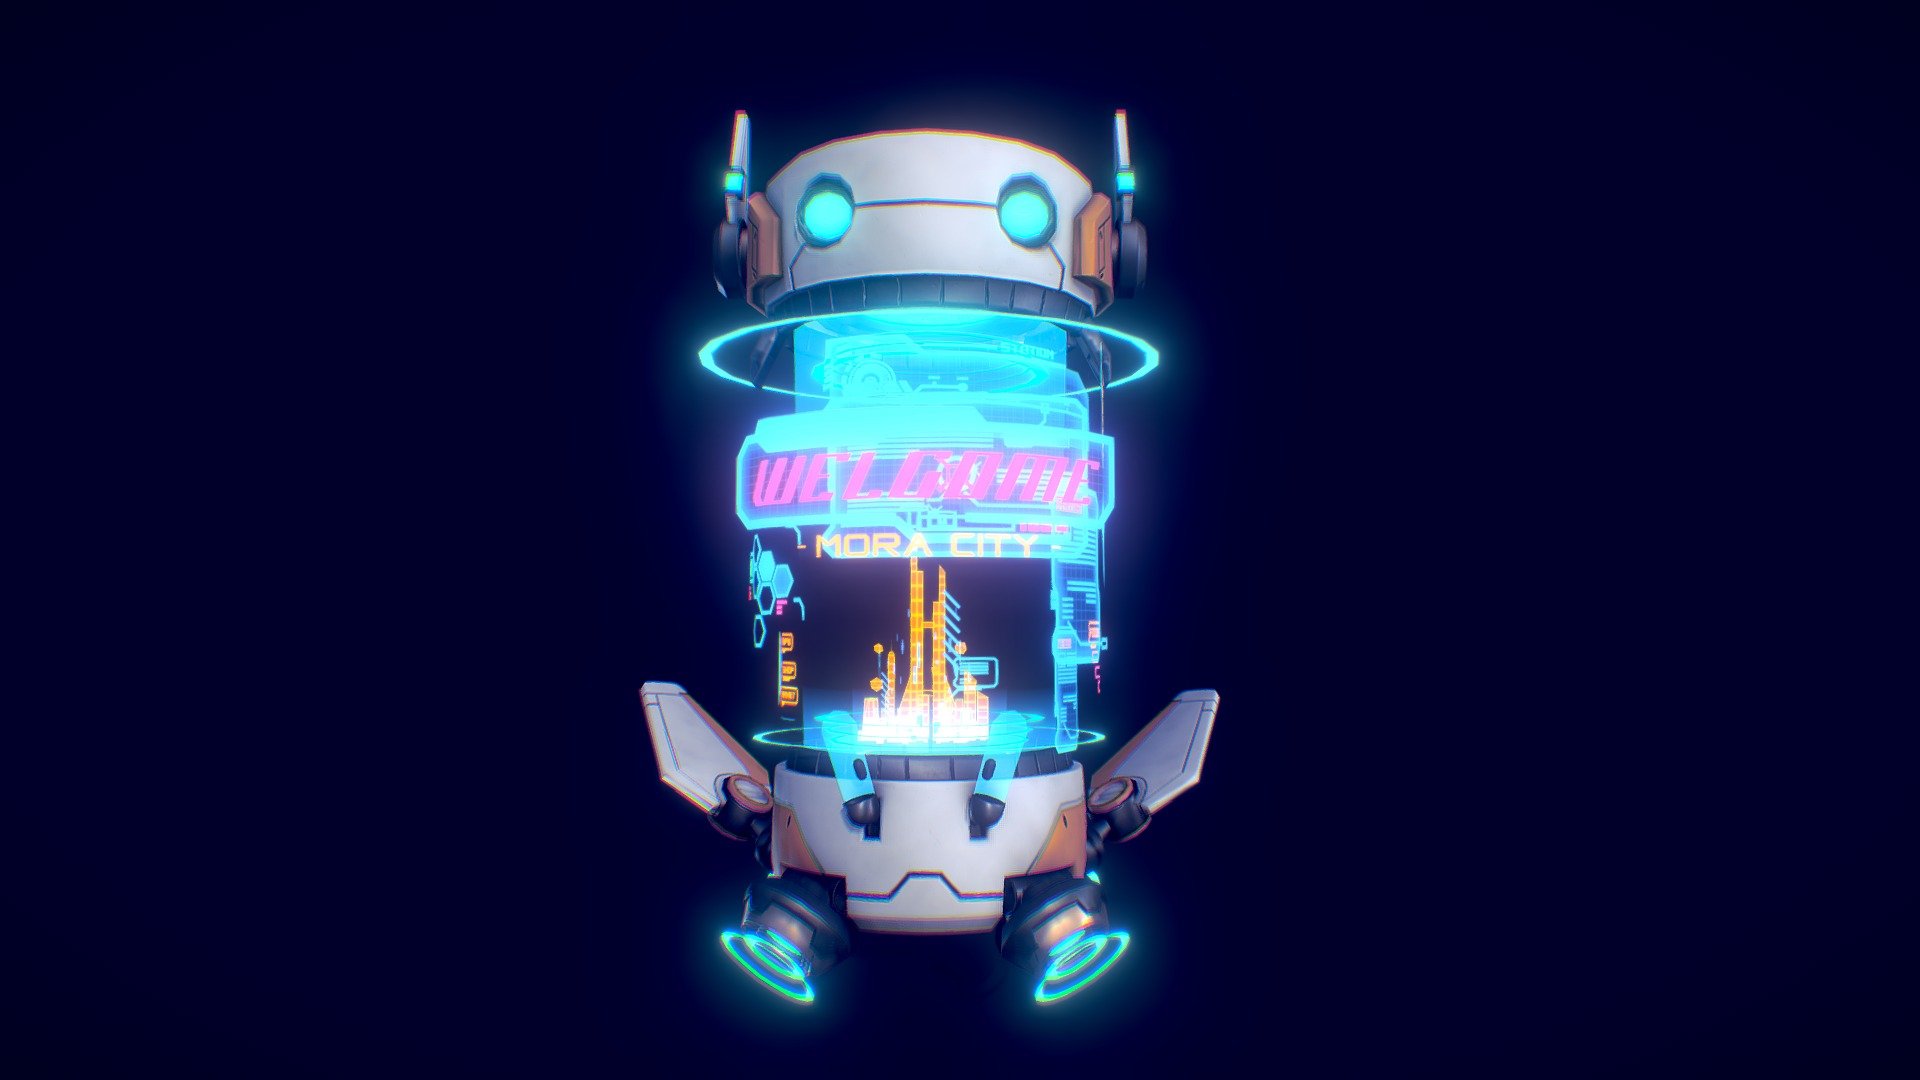 this is a robot that will you find when you arrived to Mora city which will guide and help everything that you need. so don’t worry about what and how you will explore this city 3d model